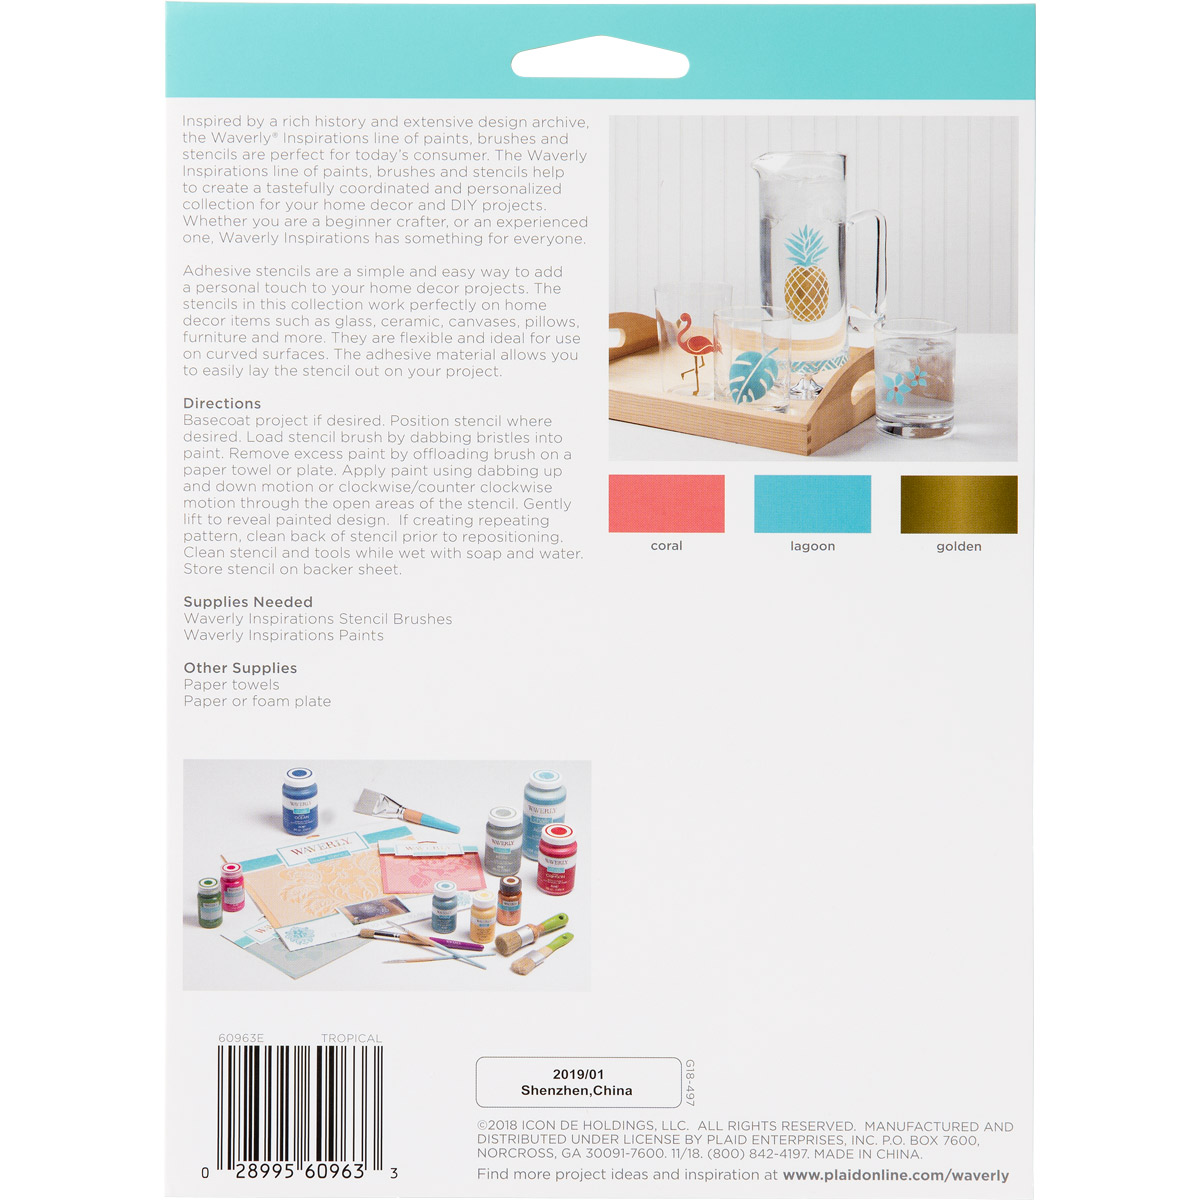 Waverly ® Inspirations Laser-cut Adhesive Stencils - Tropical, 6